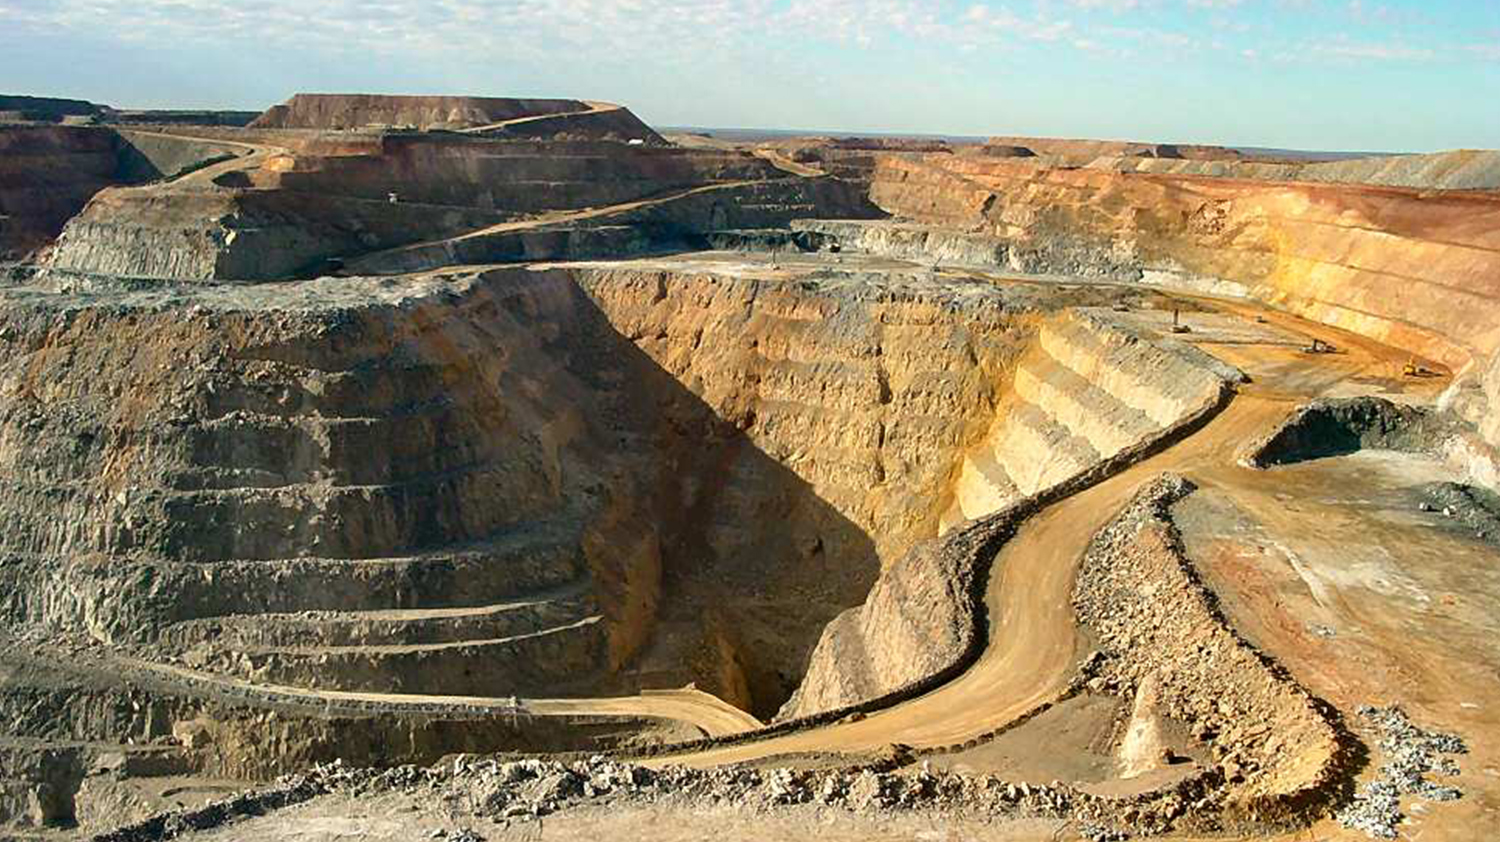 Photograph of an open pit mine in Australia where there is a deep, open pit in the centre. The surrounding landscape is yellow and golden in colour and the sky on the horizon is very pale blue.